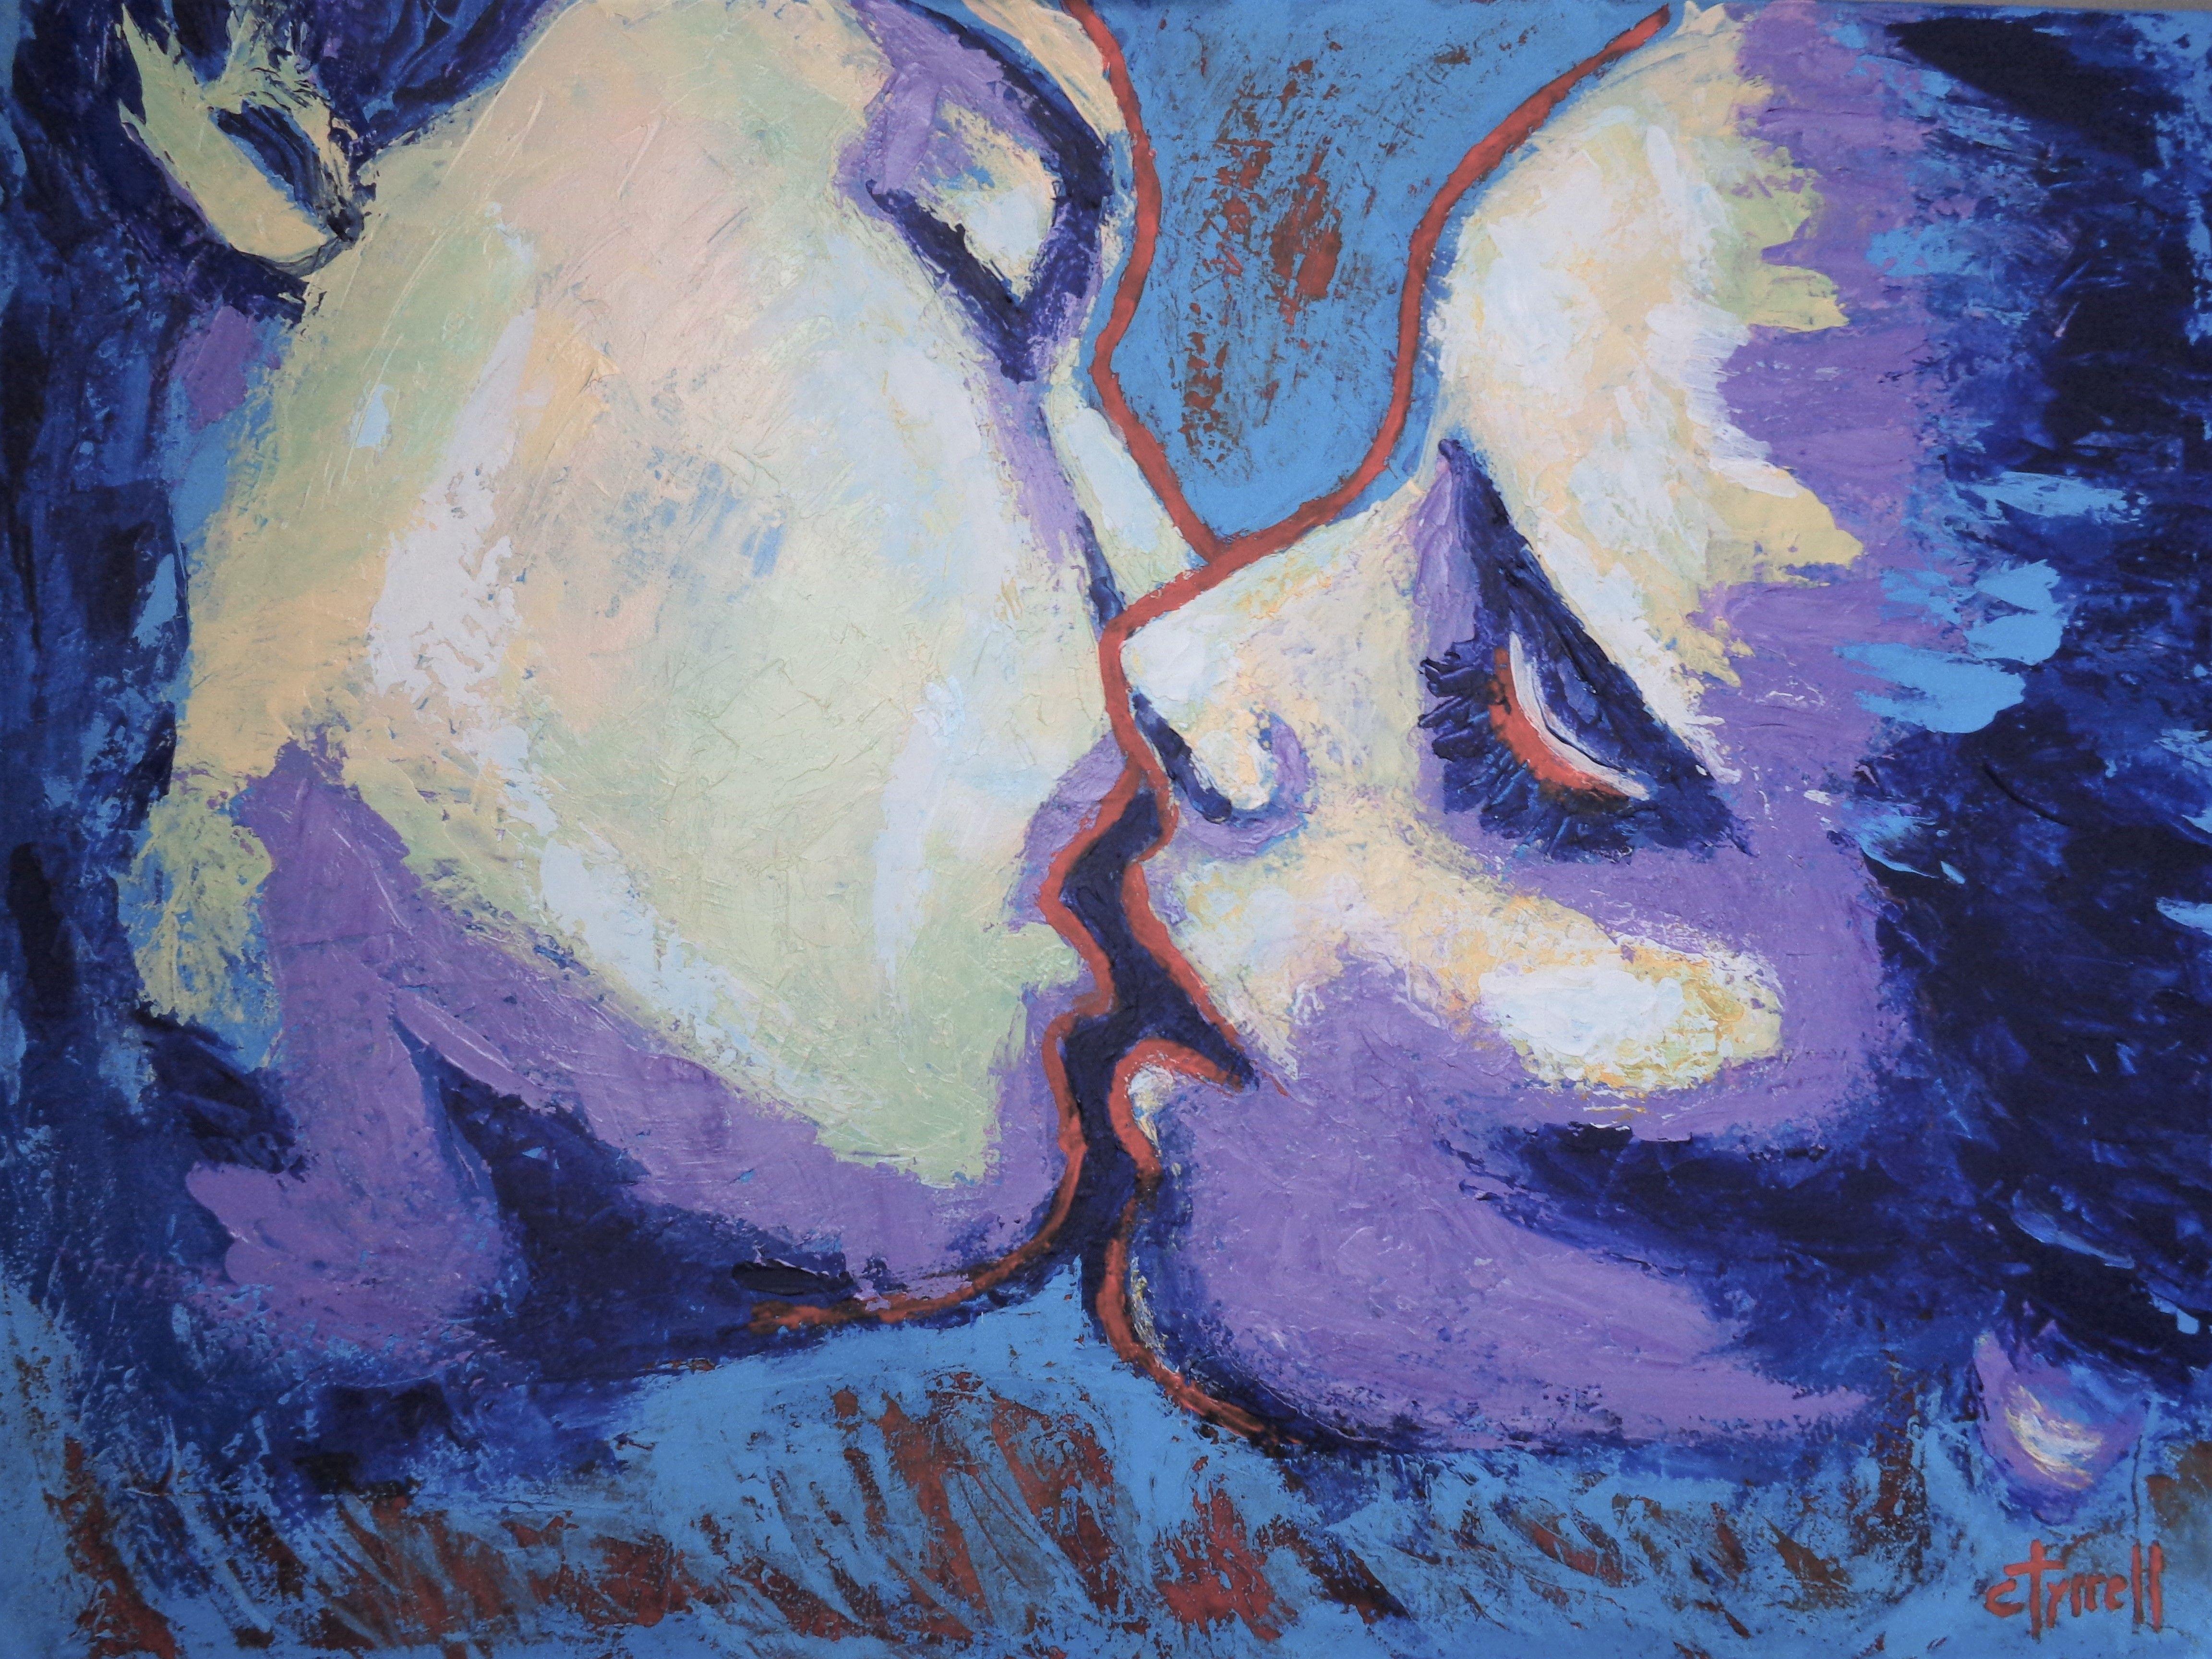 Original expressionist figurative acrylics painting on stretched canvas, painted edges and ready to hang. Frame is optional. Part of the series of Lovers portraits, romantic image of a man and woman kissing. Colourful and textured. Use of light